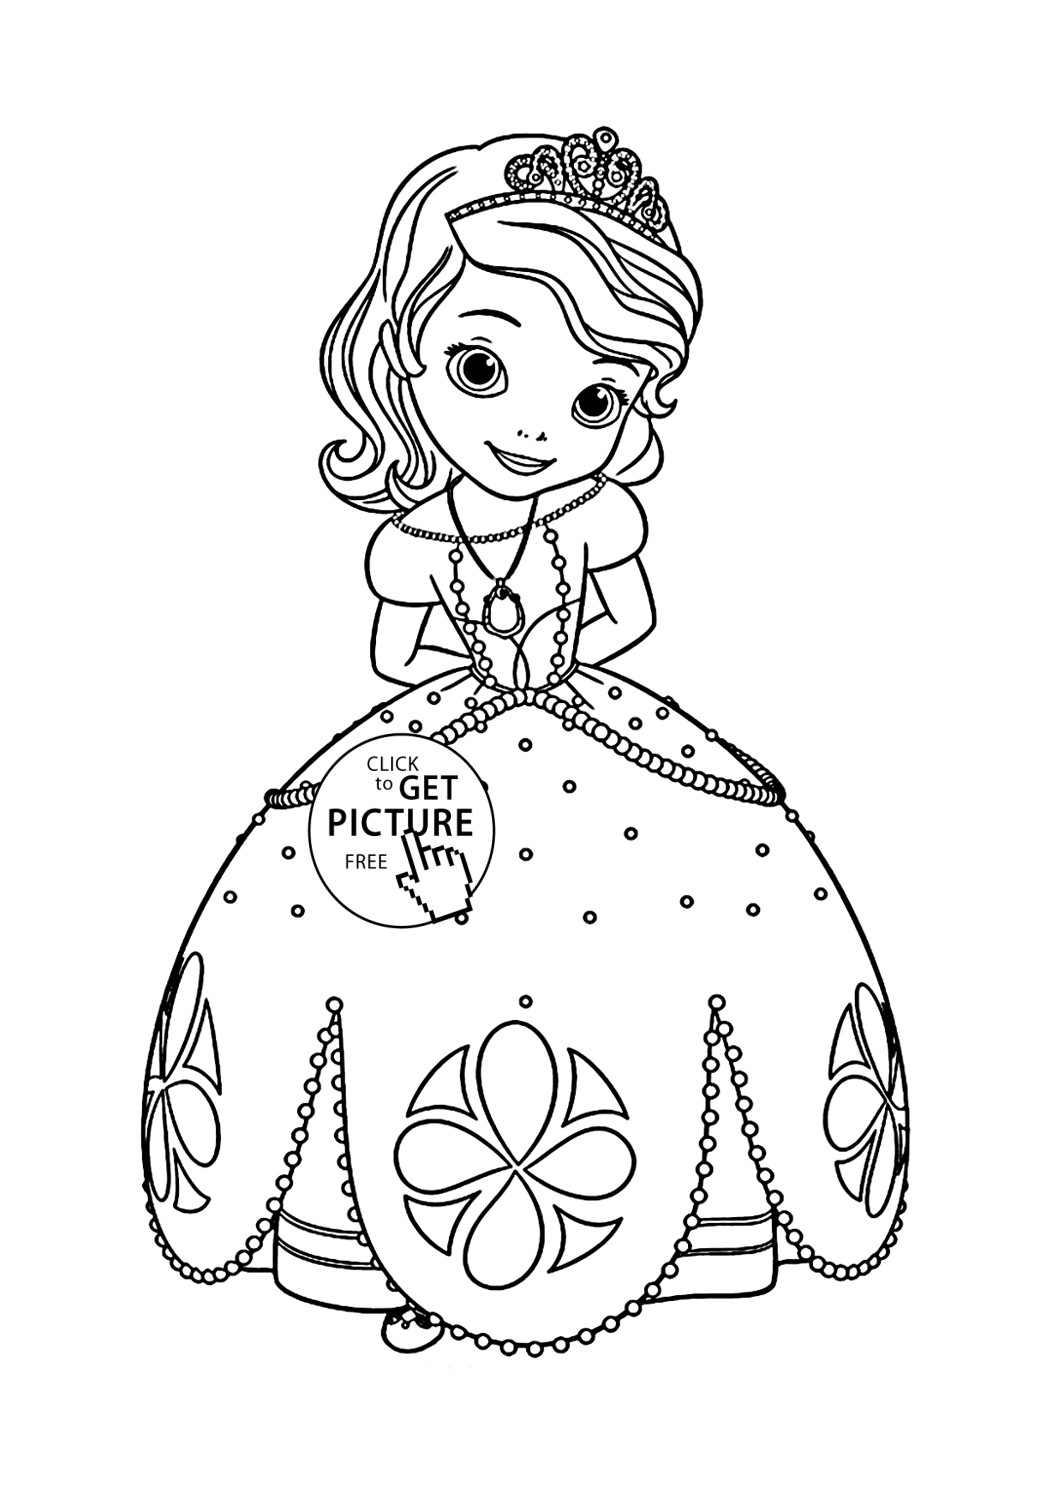 Princess Coloring Pages For Girls
 Princess Sofia coloring page for girls disney for kids